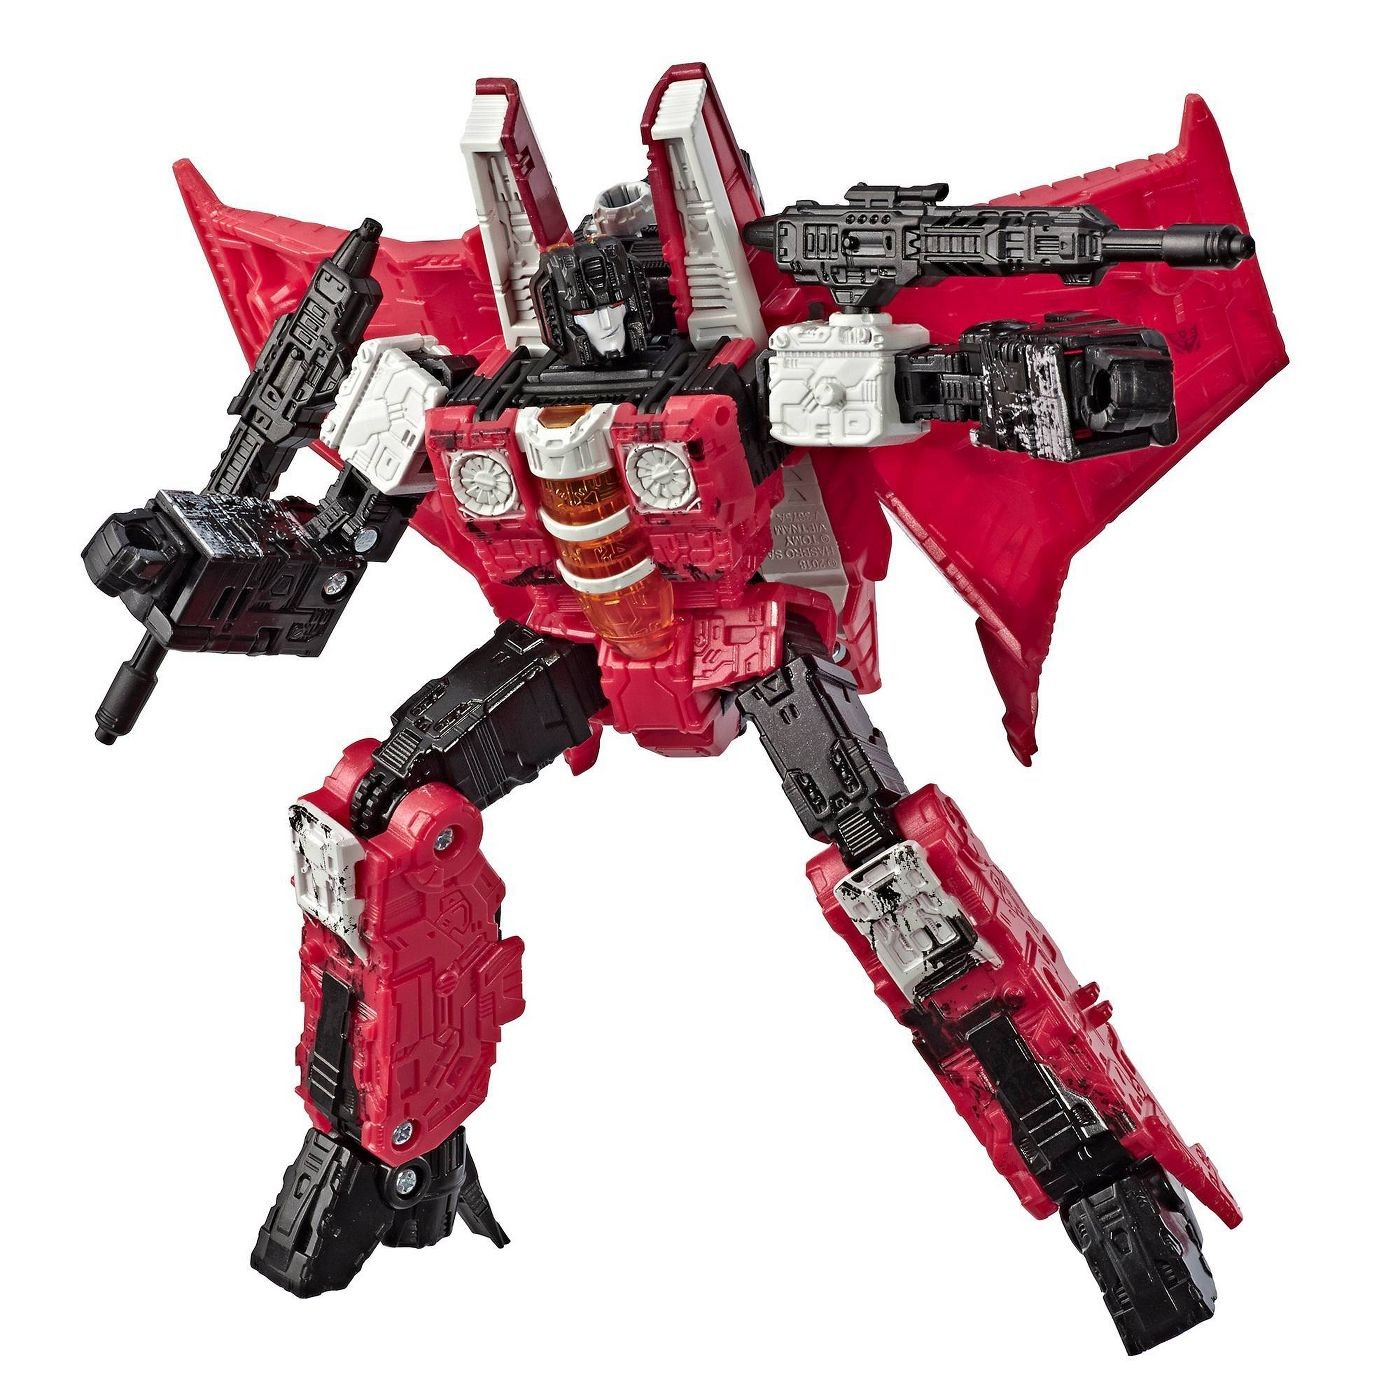 Transformers News: Canada Transformers news with Red Wing Finally Available, Great deal on Jetfire and More